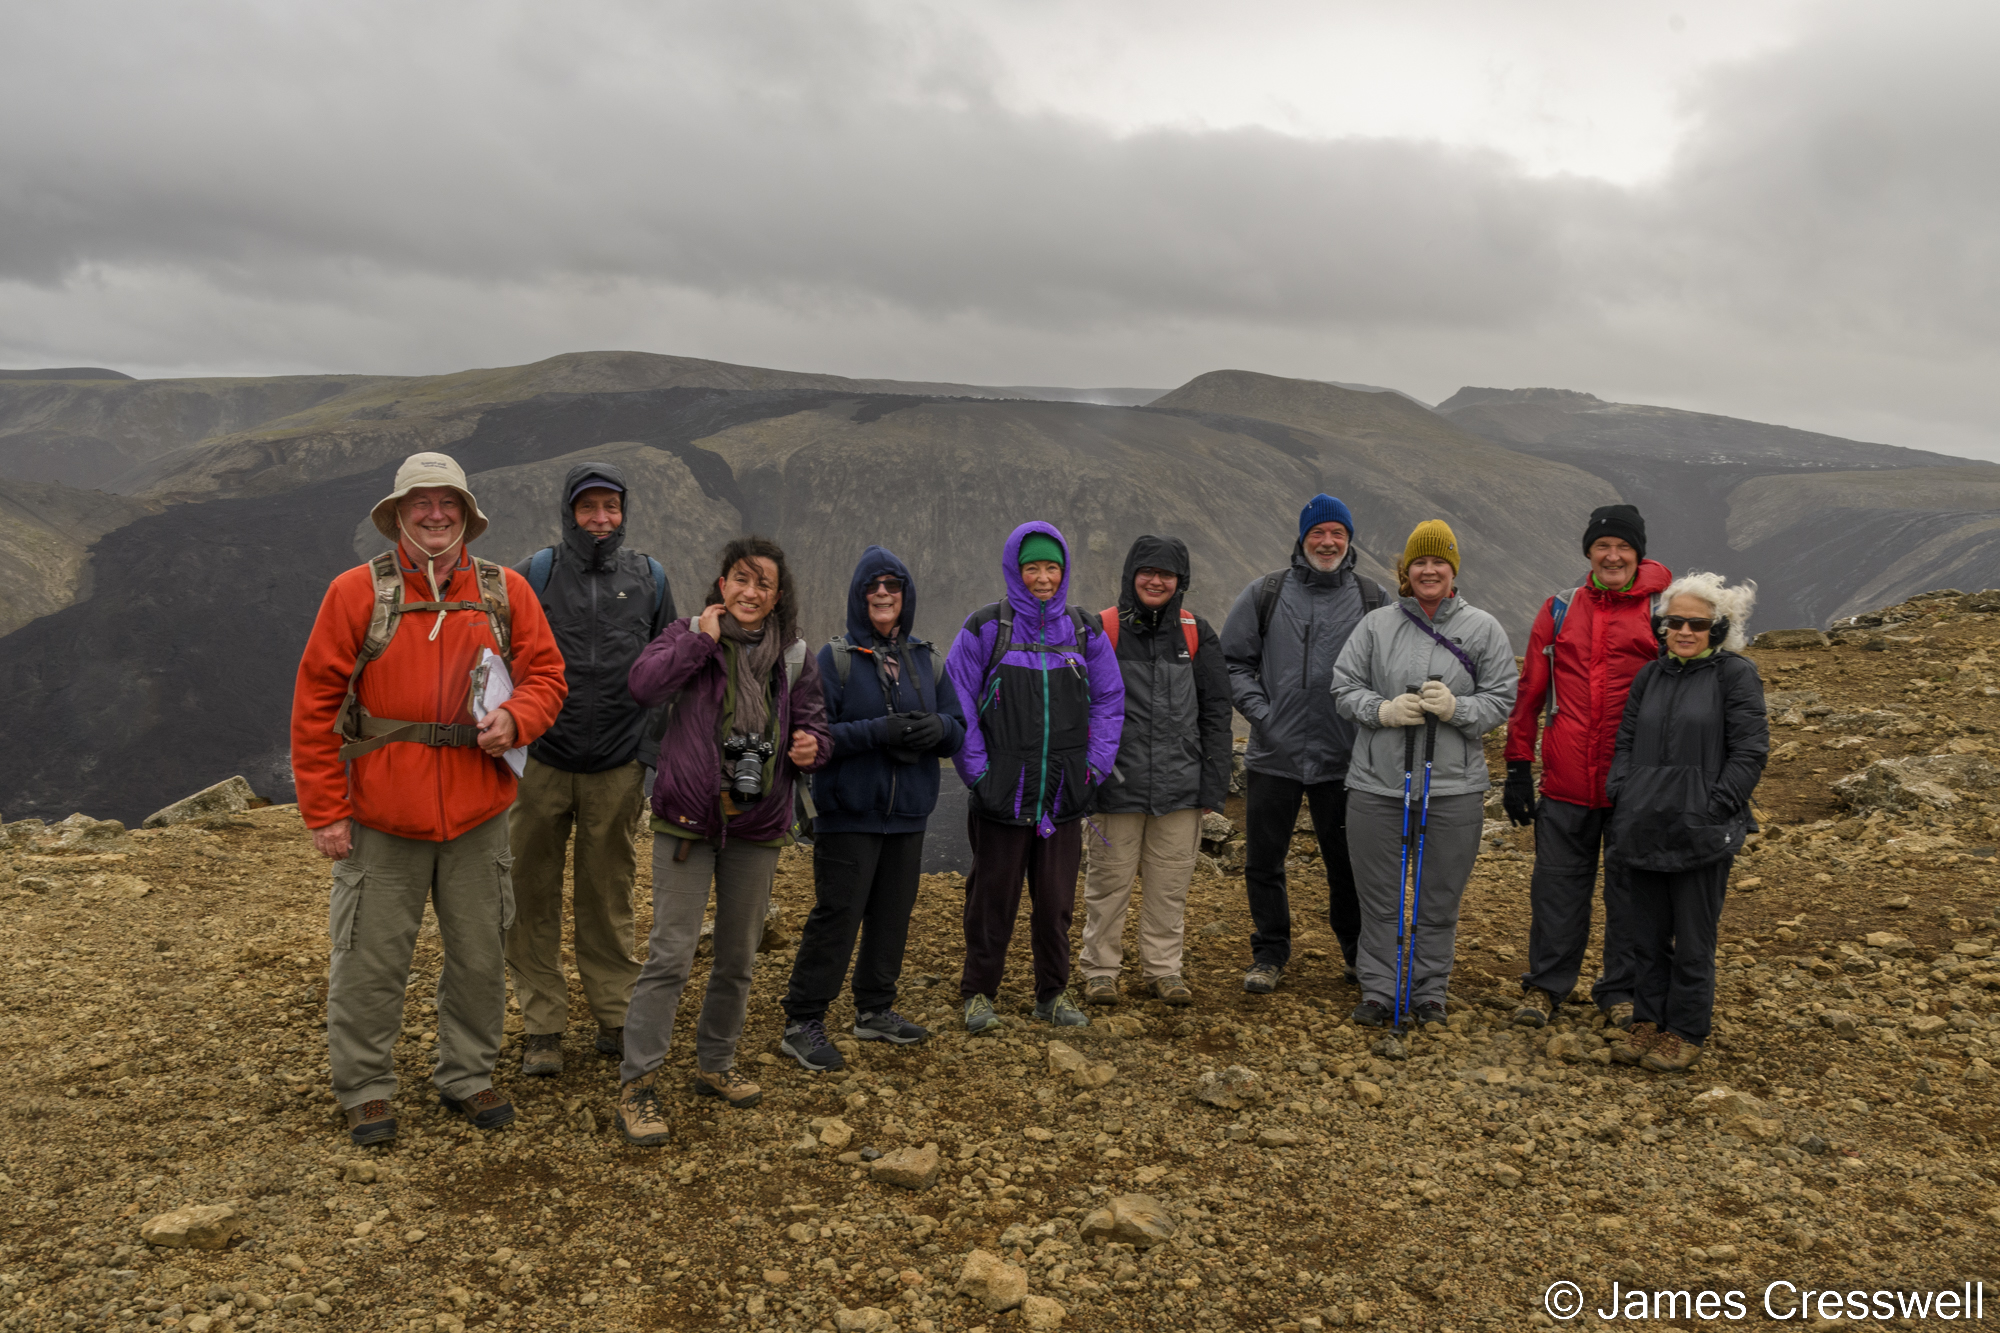 Group of people in front of volcanic landscape